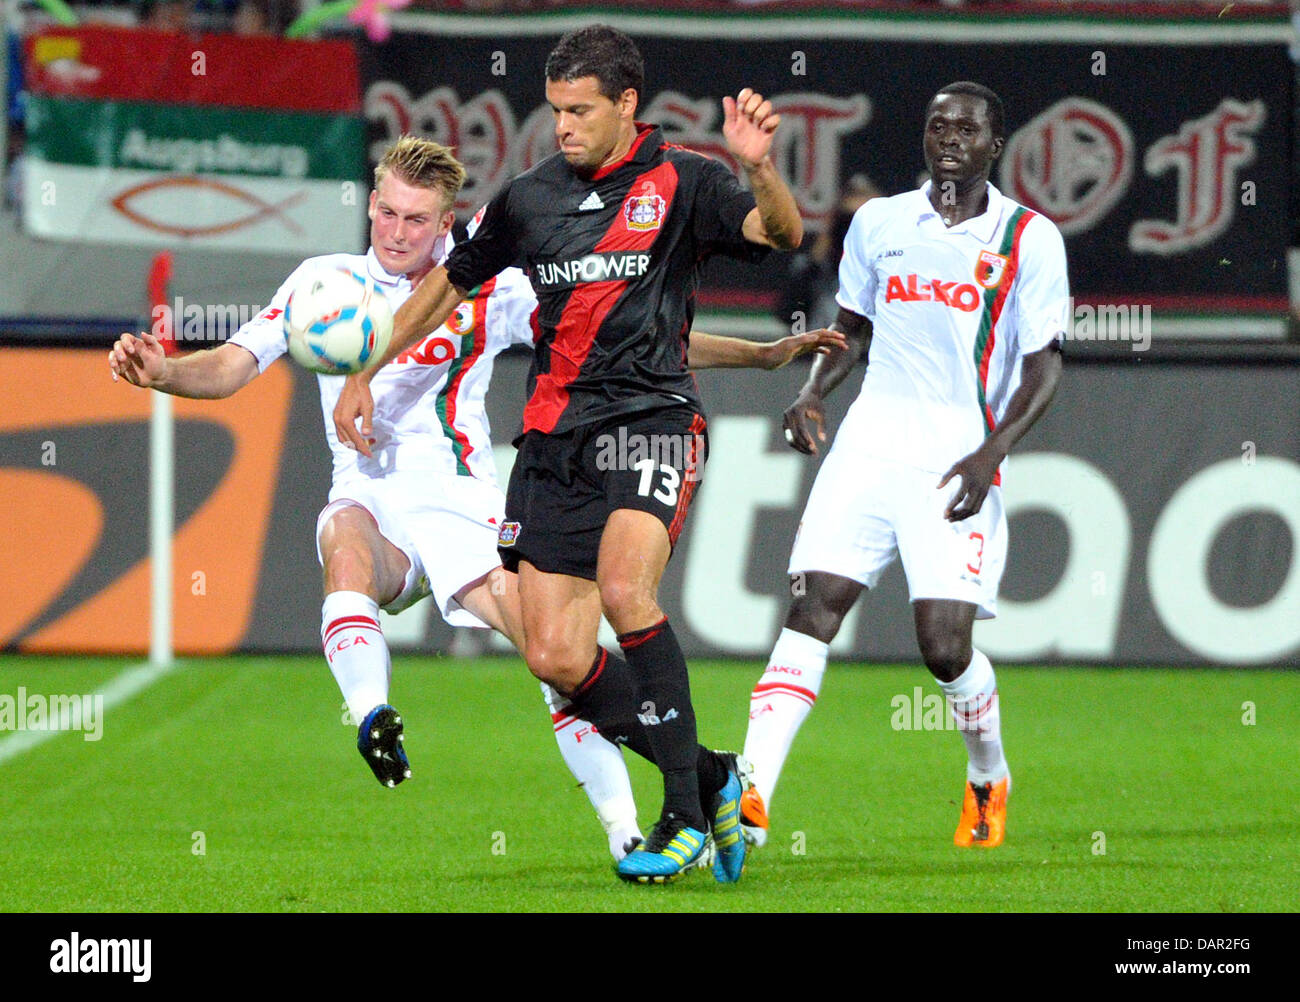 Leverkusen's Michael Ballack vies for the ball with Augsburg's Jan-Ingwer Callsen-Bracker (L) jersey during the German Bundesliga match between FC Augsburg and Bayer Leverkusen at the SGL Arena in Ausgburg, Germany, 09 September 2011. Photo: STEFAN PUCHNER  (ATTENTION: EMBARGO CONDITIONS! The DFL permits the further utilisation of the pictures in IPTV, mobile services and other new Stock Photo